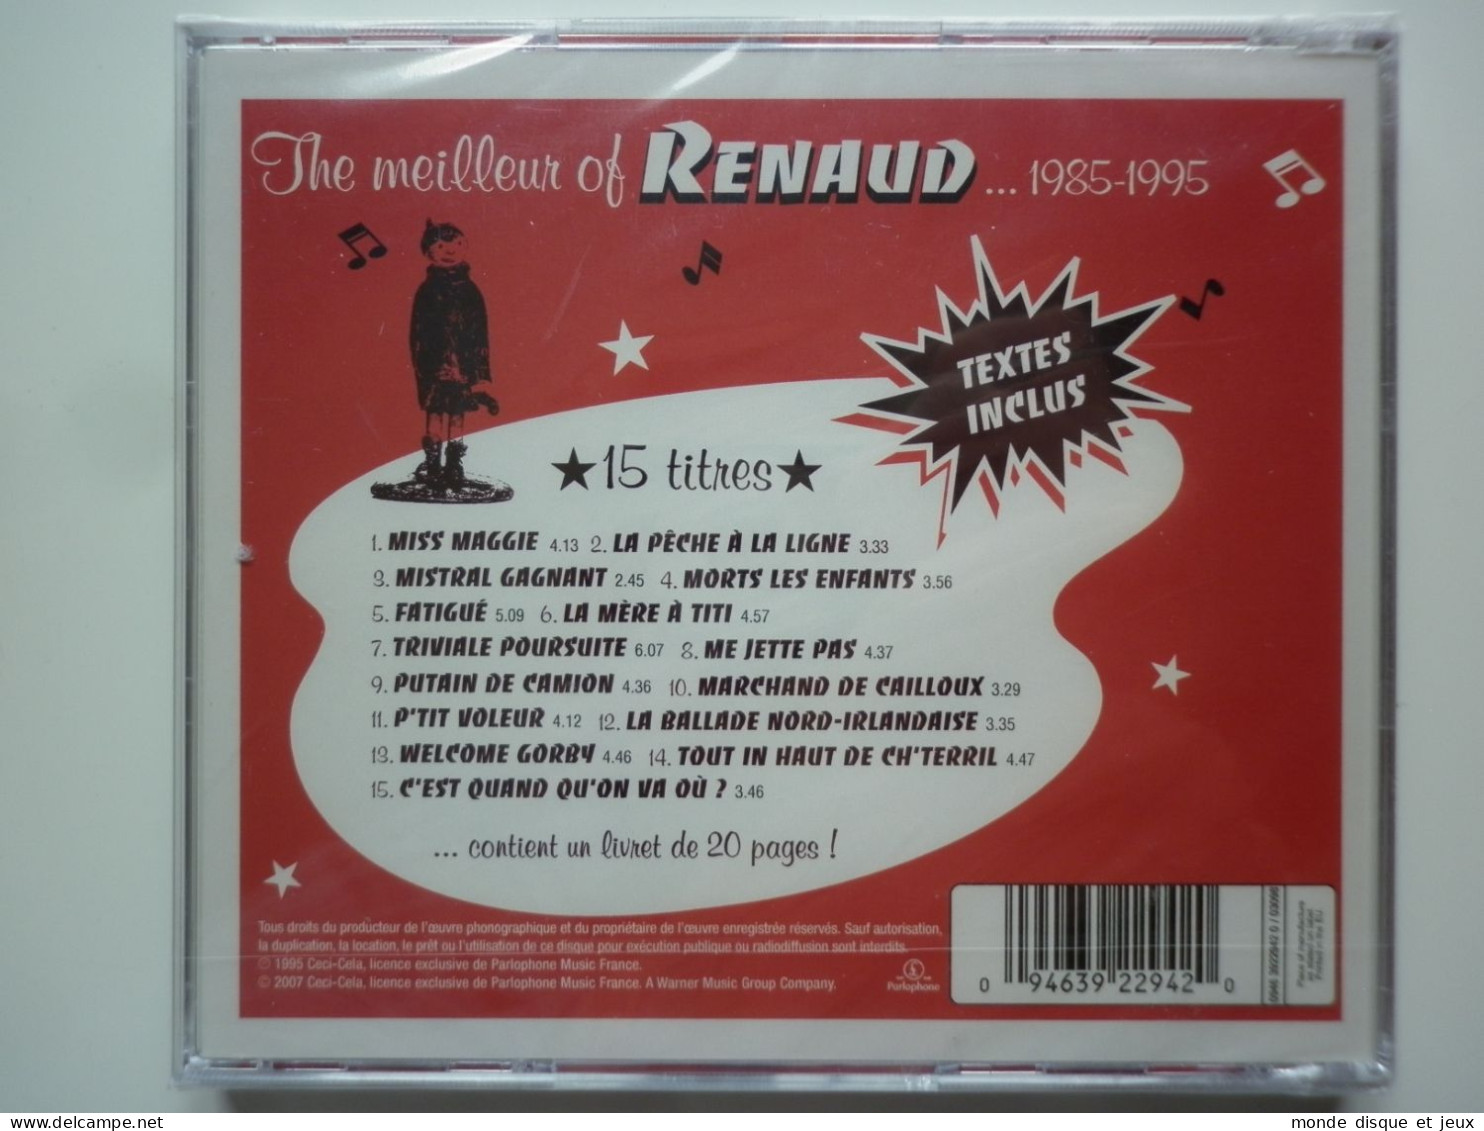 Renaud Cd Album The Meilleur Of Renaud 85-95 - Other - French Music